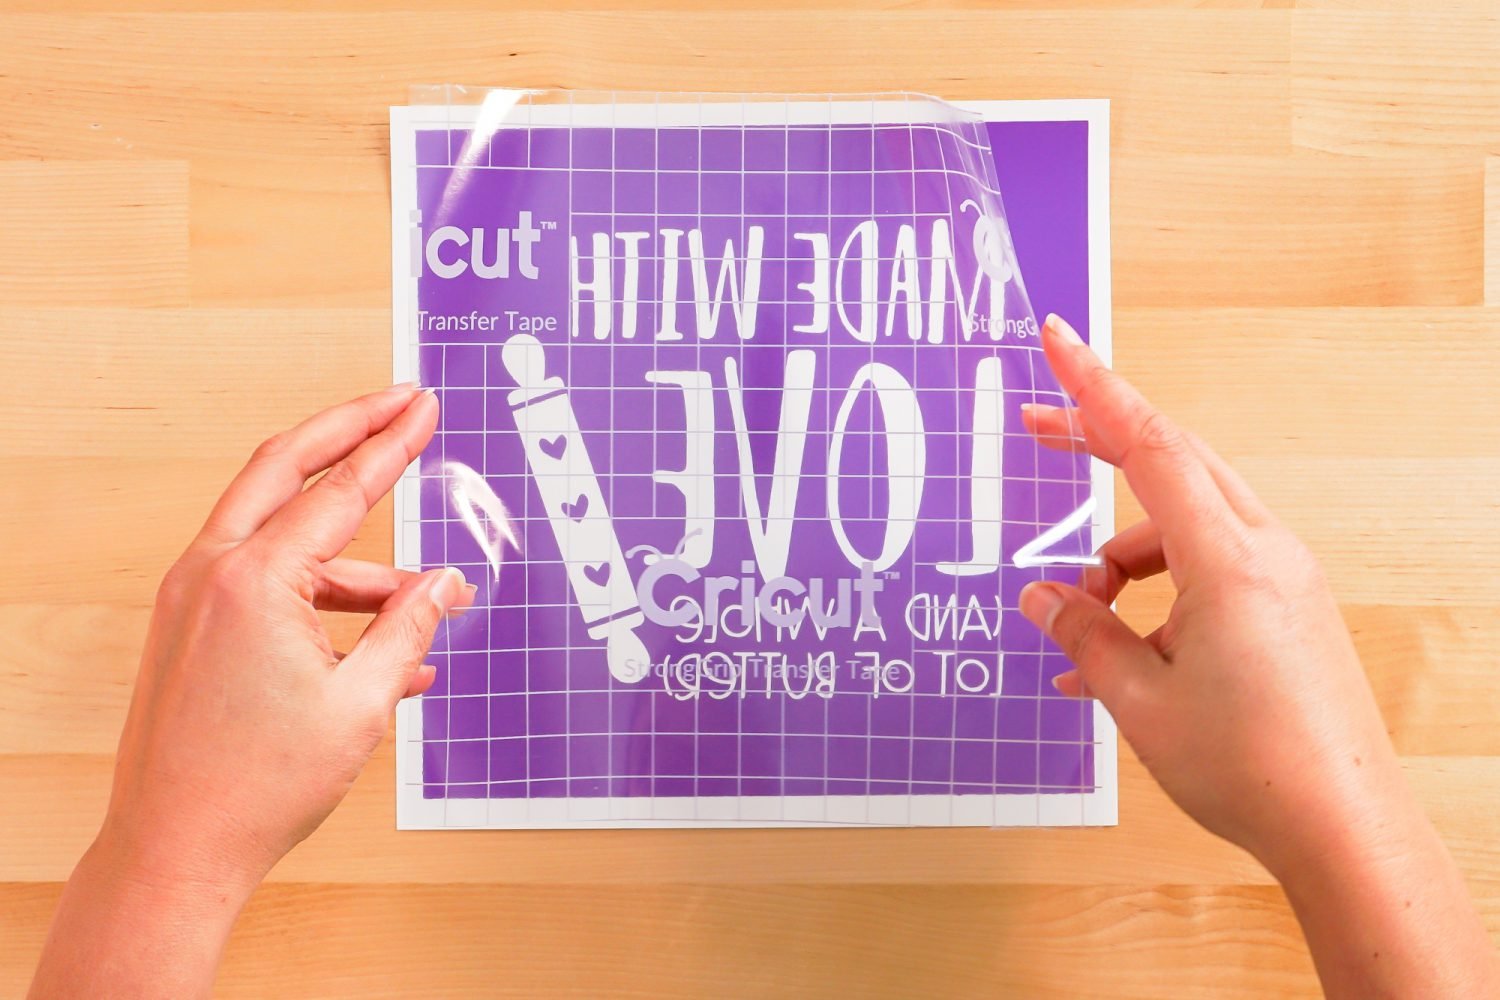 Hands placing transfer tape on image